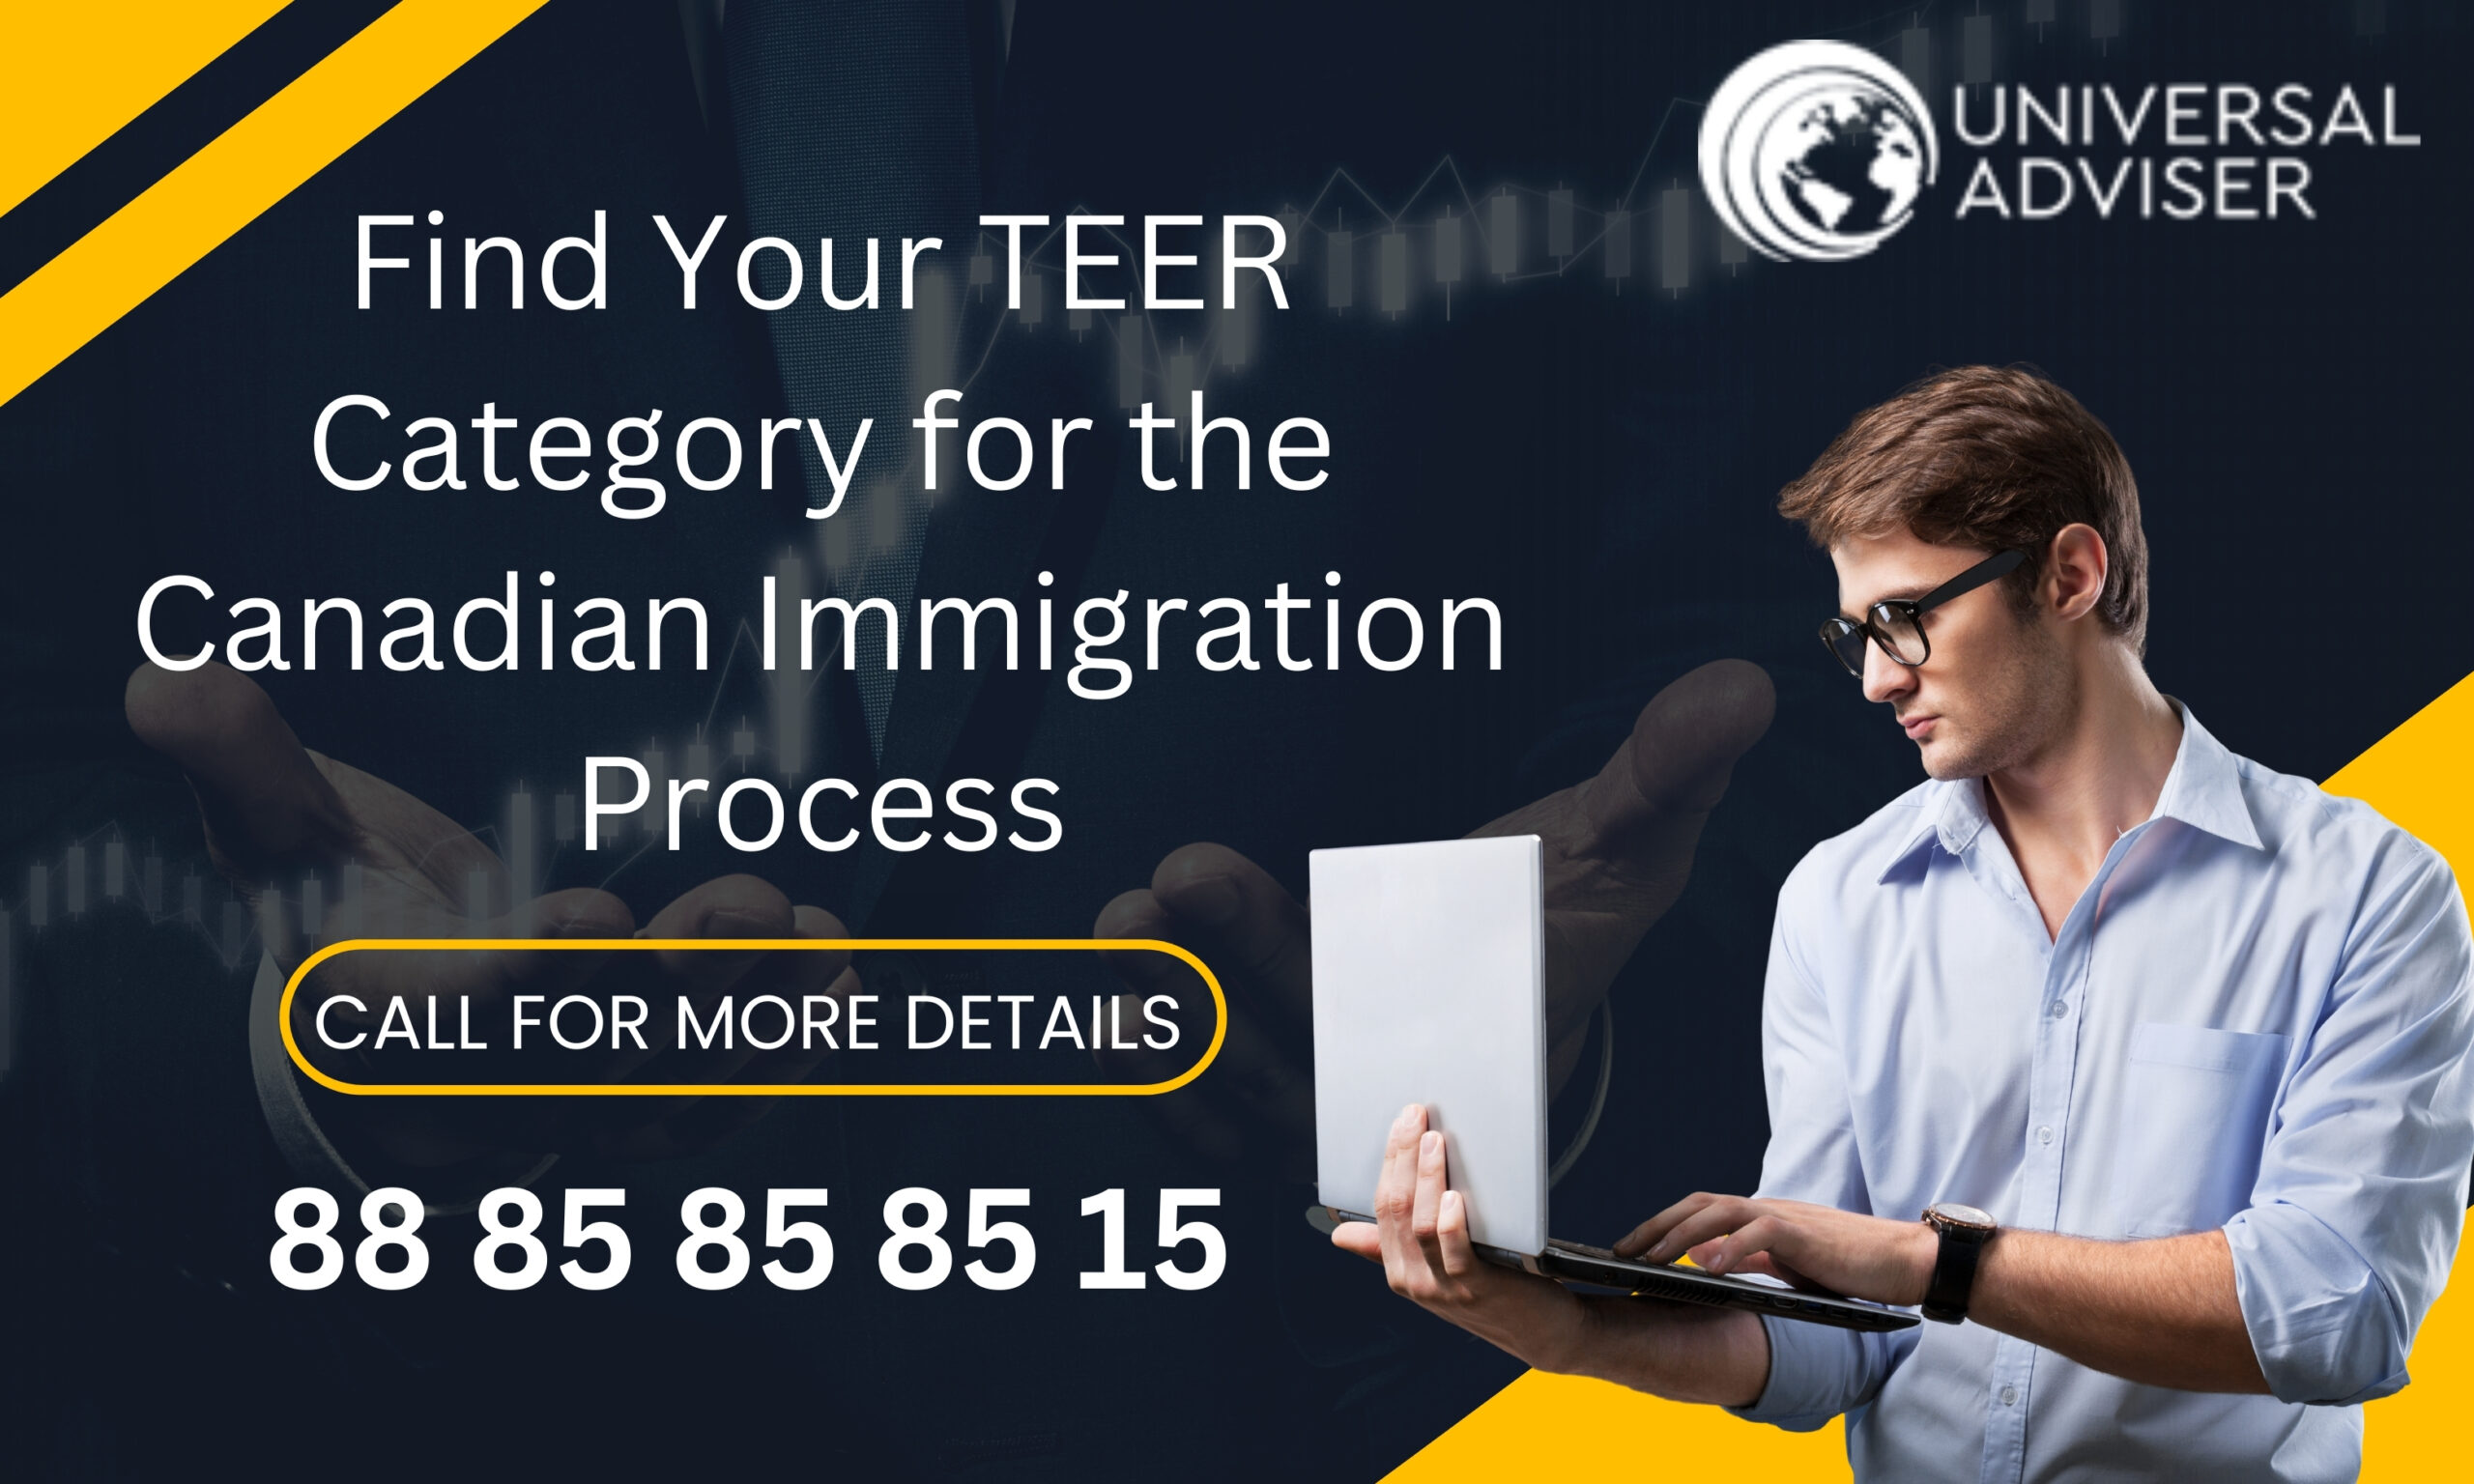 Find Your TEER Category for the Canadian Immigration Process